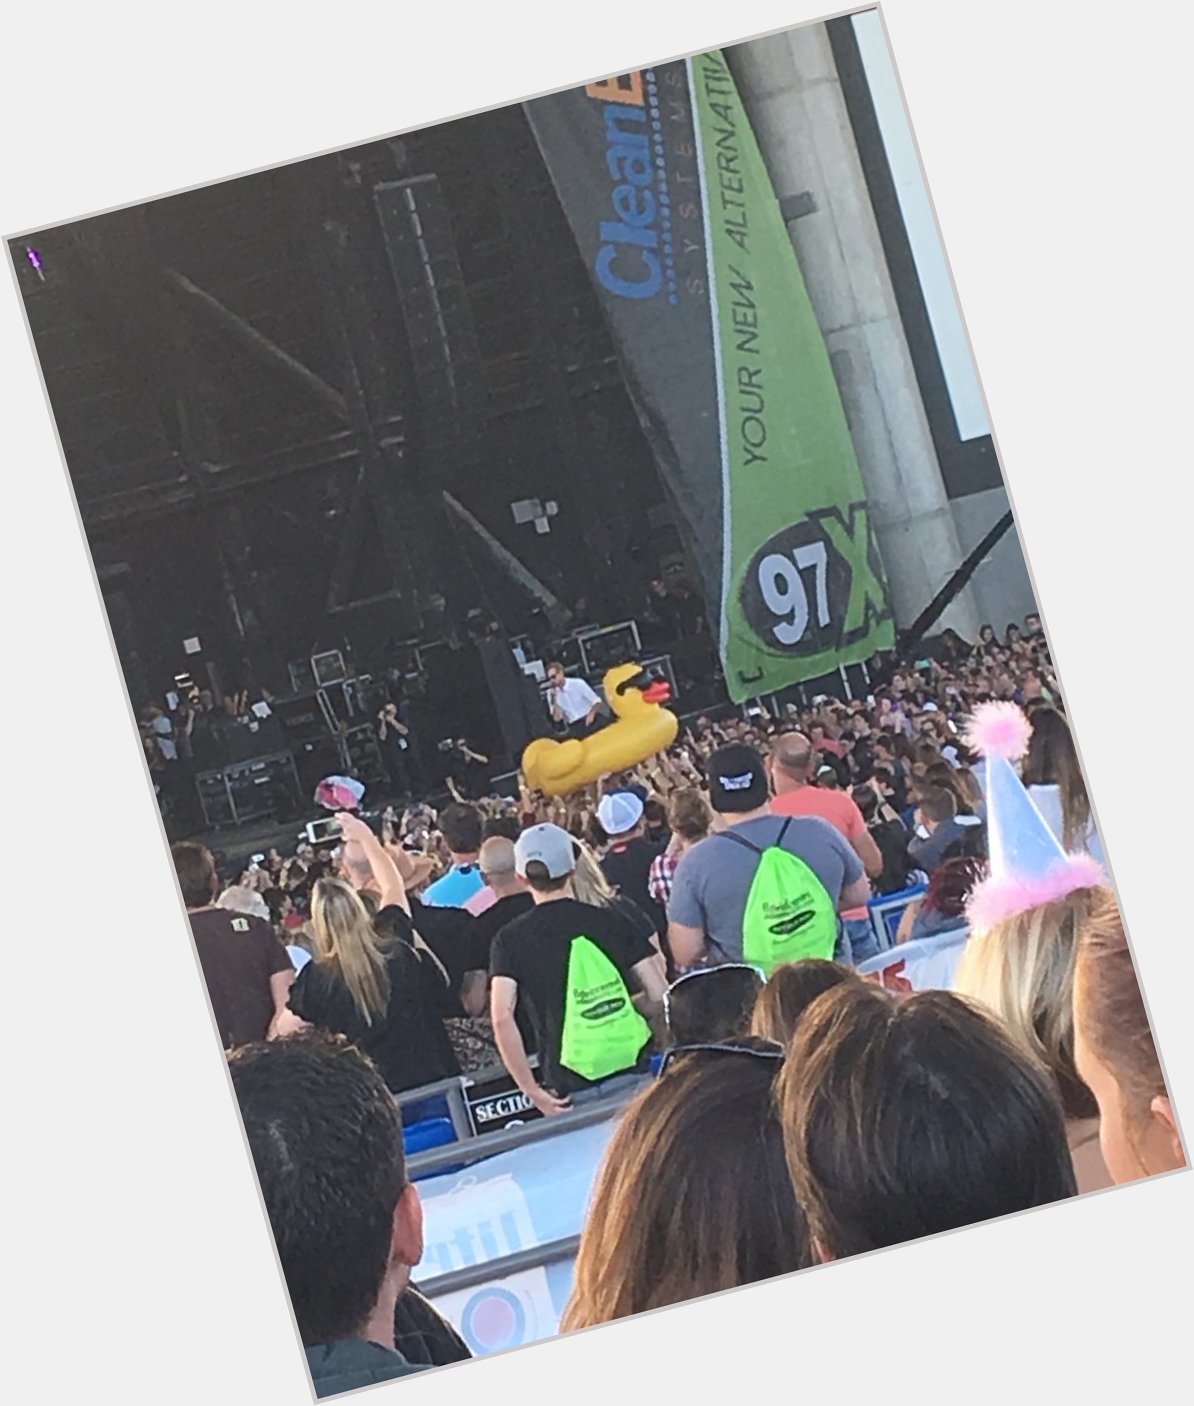 Concert highlights 

Rubber duck crowd surf and singing happy birthday to Vance joy who got a ukulele cake 